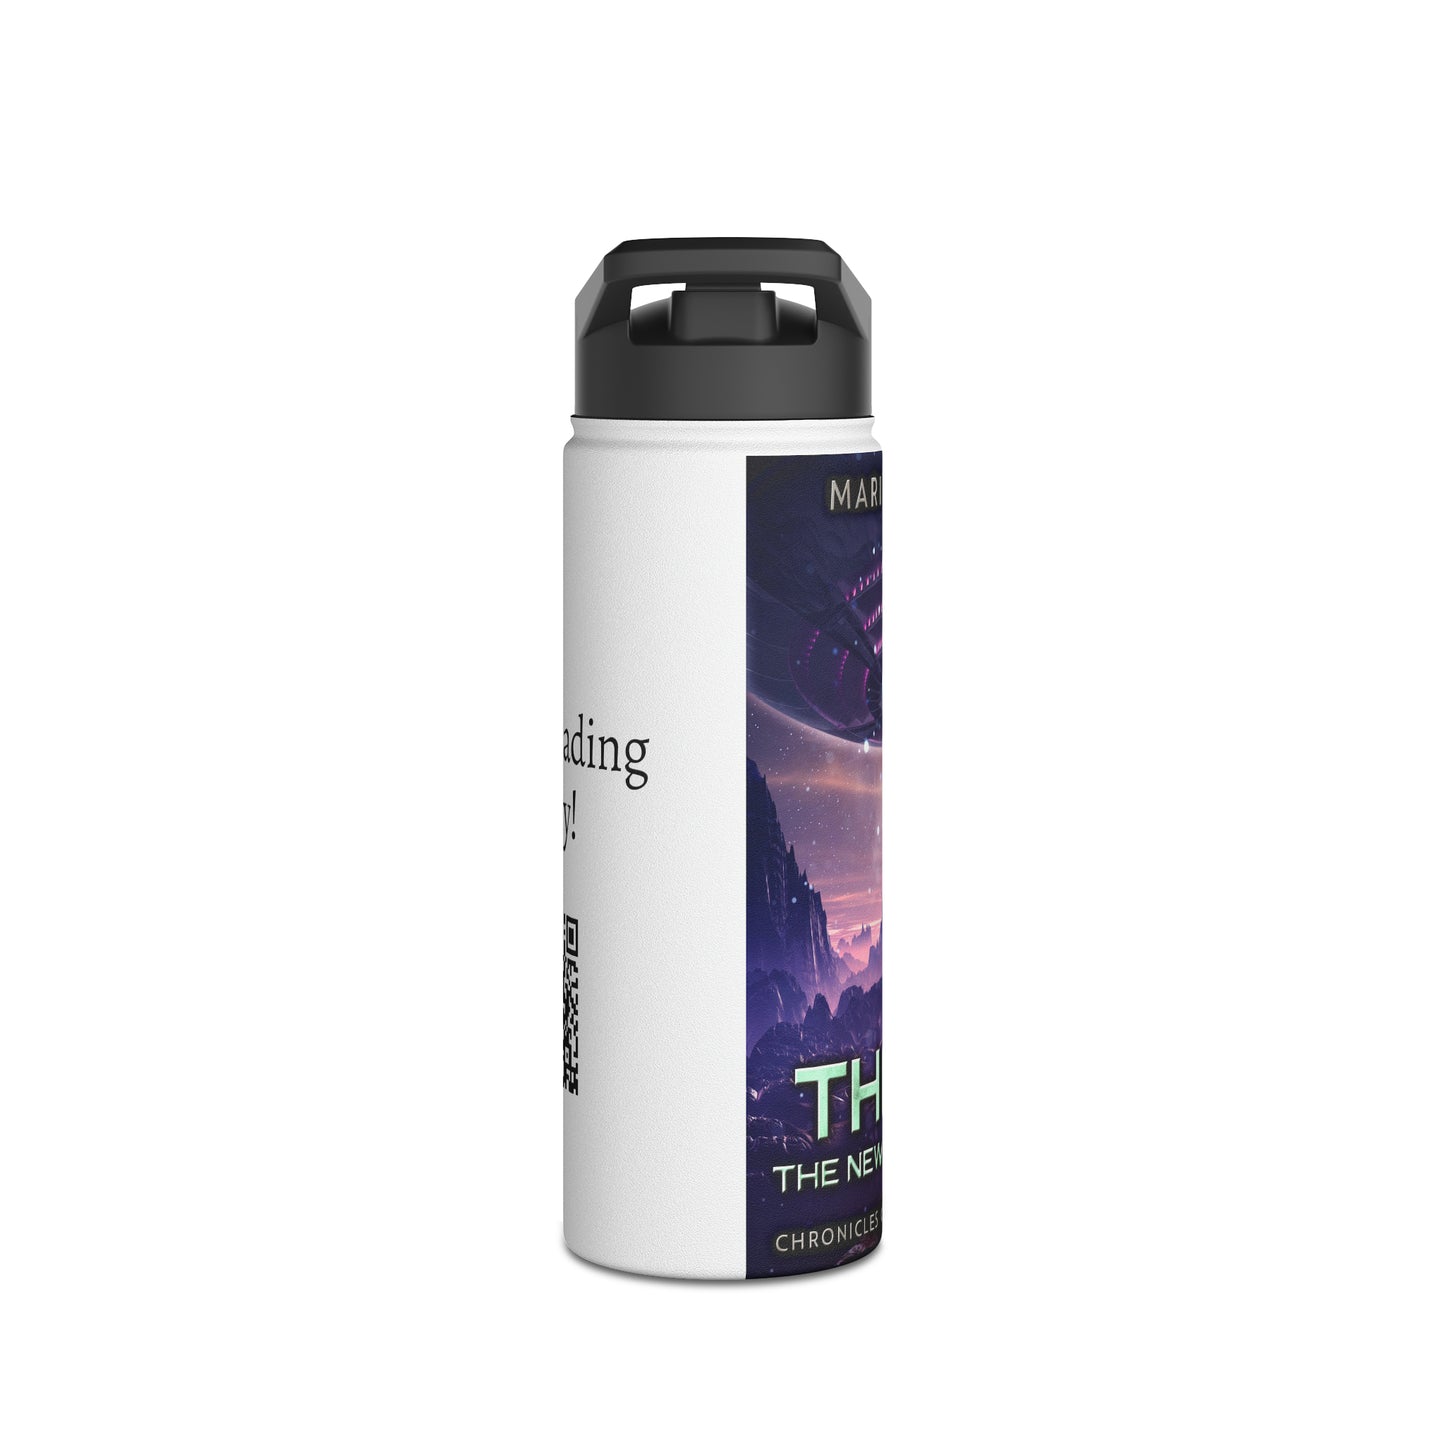 Thalia - The New Generation - Stainless Steel Water Bottle